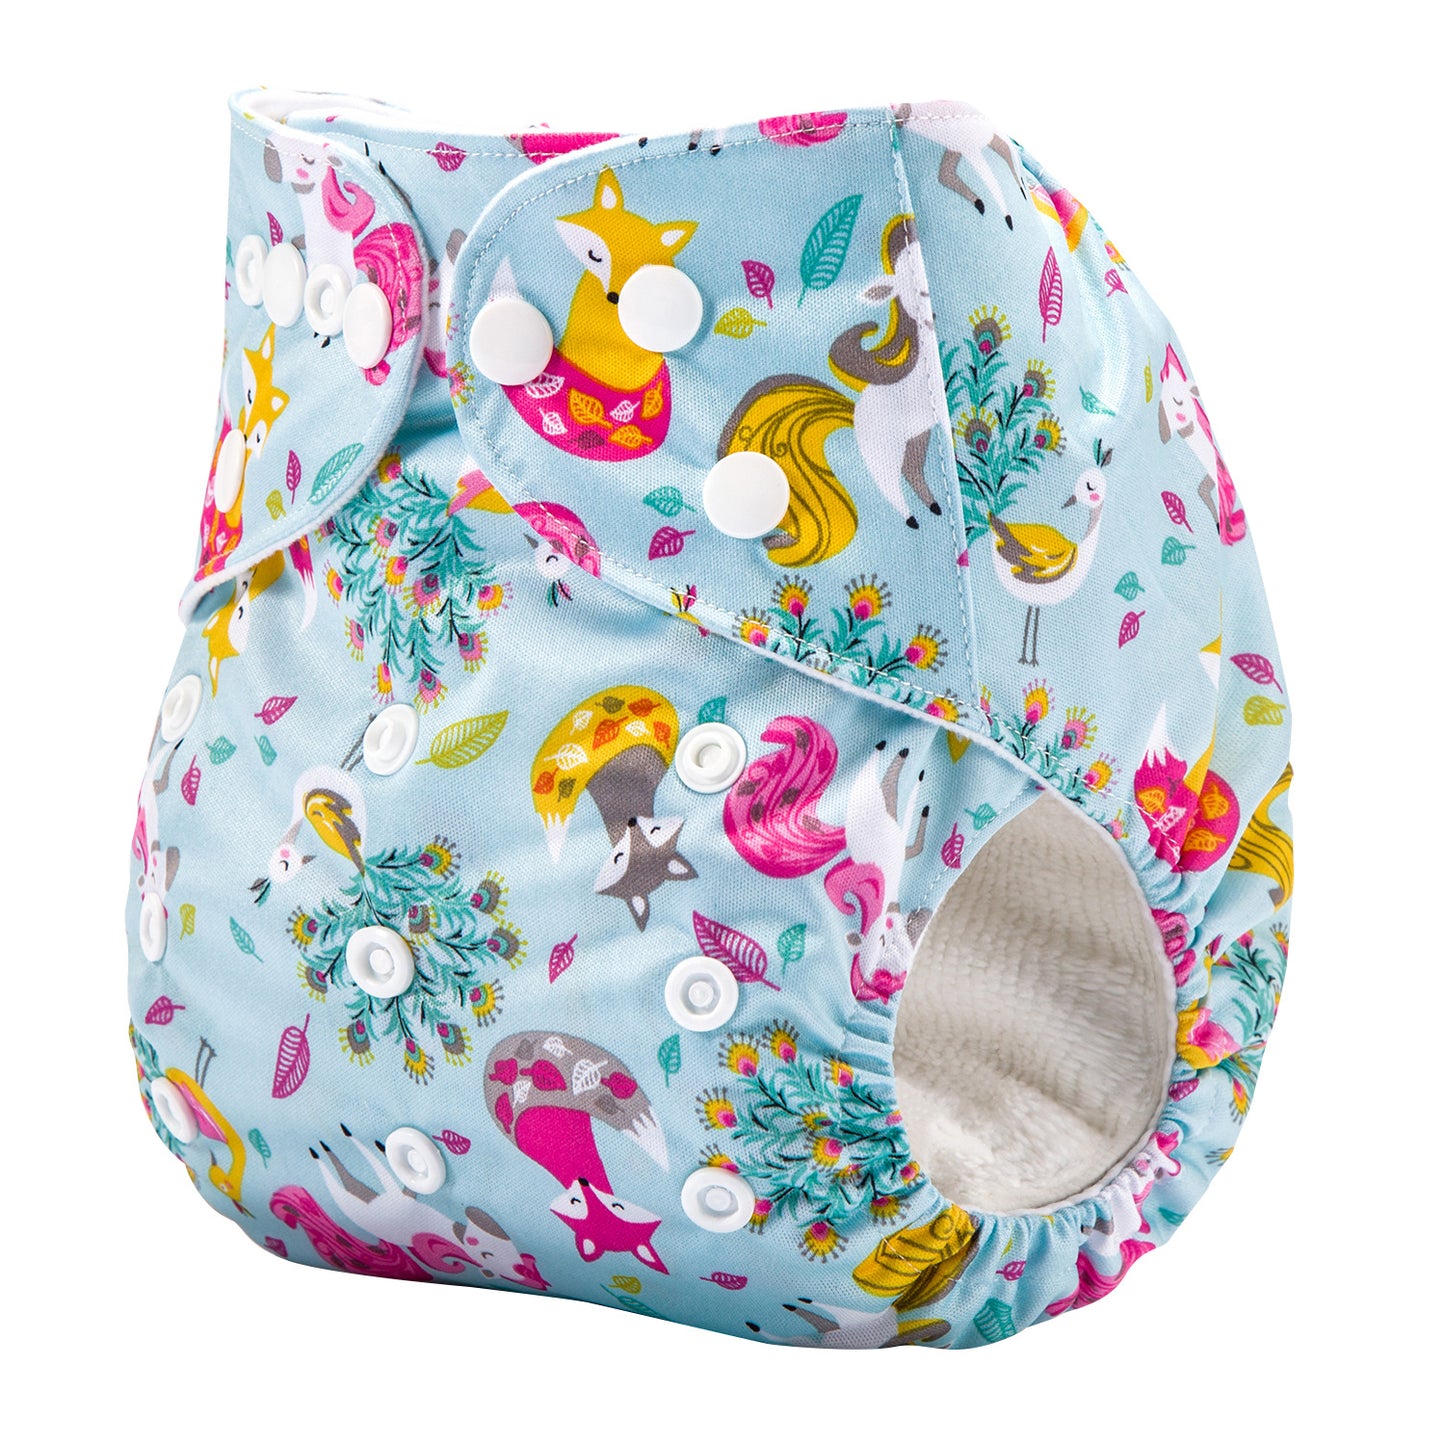 Baby Cloth Diapers Soft And Comfortable Baby Diapers